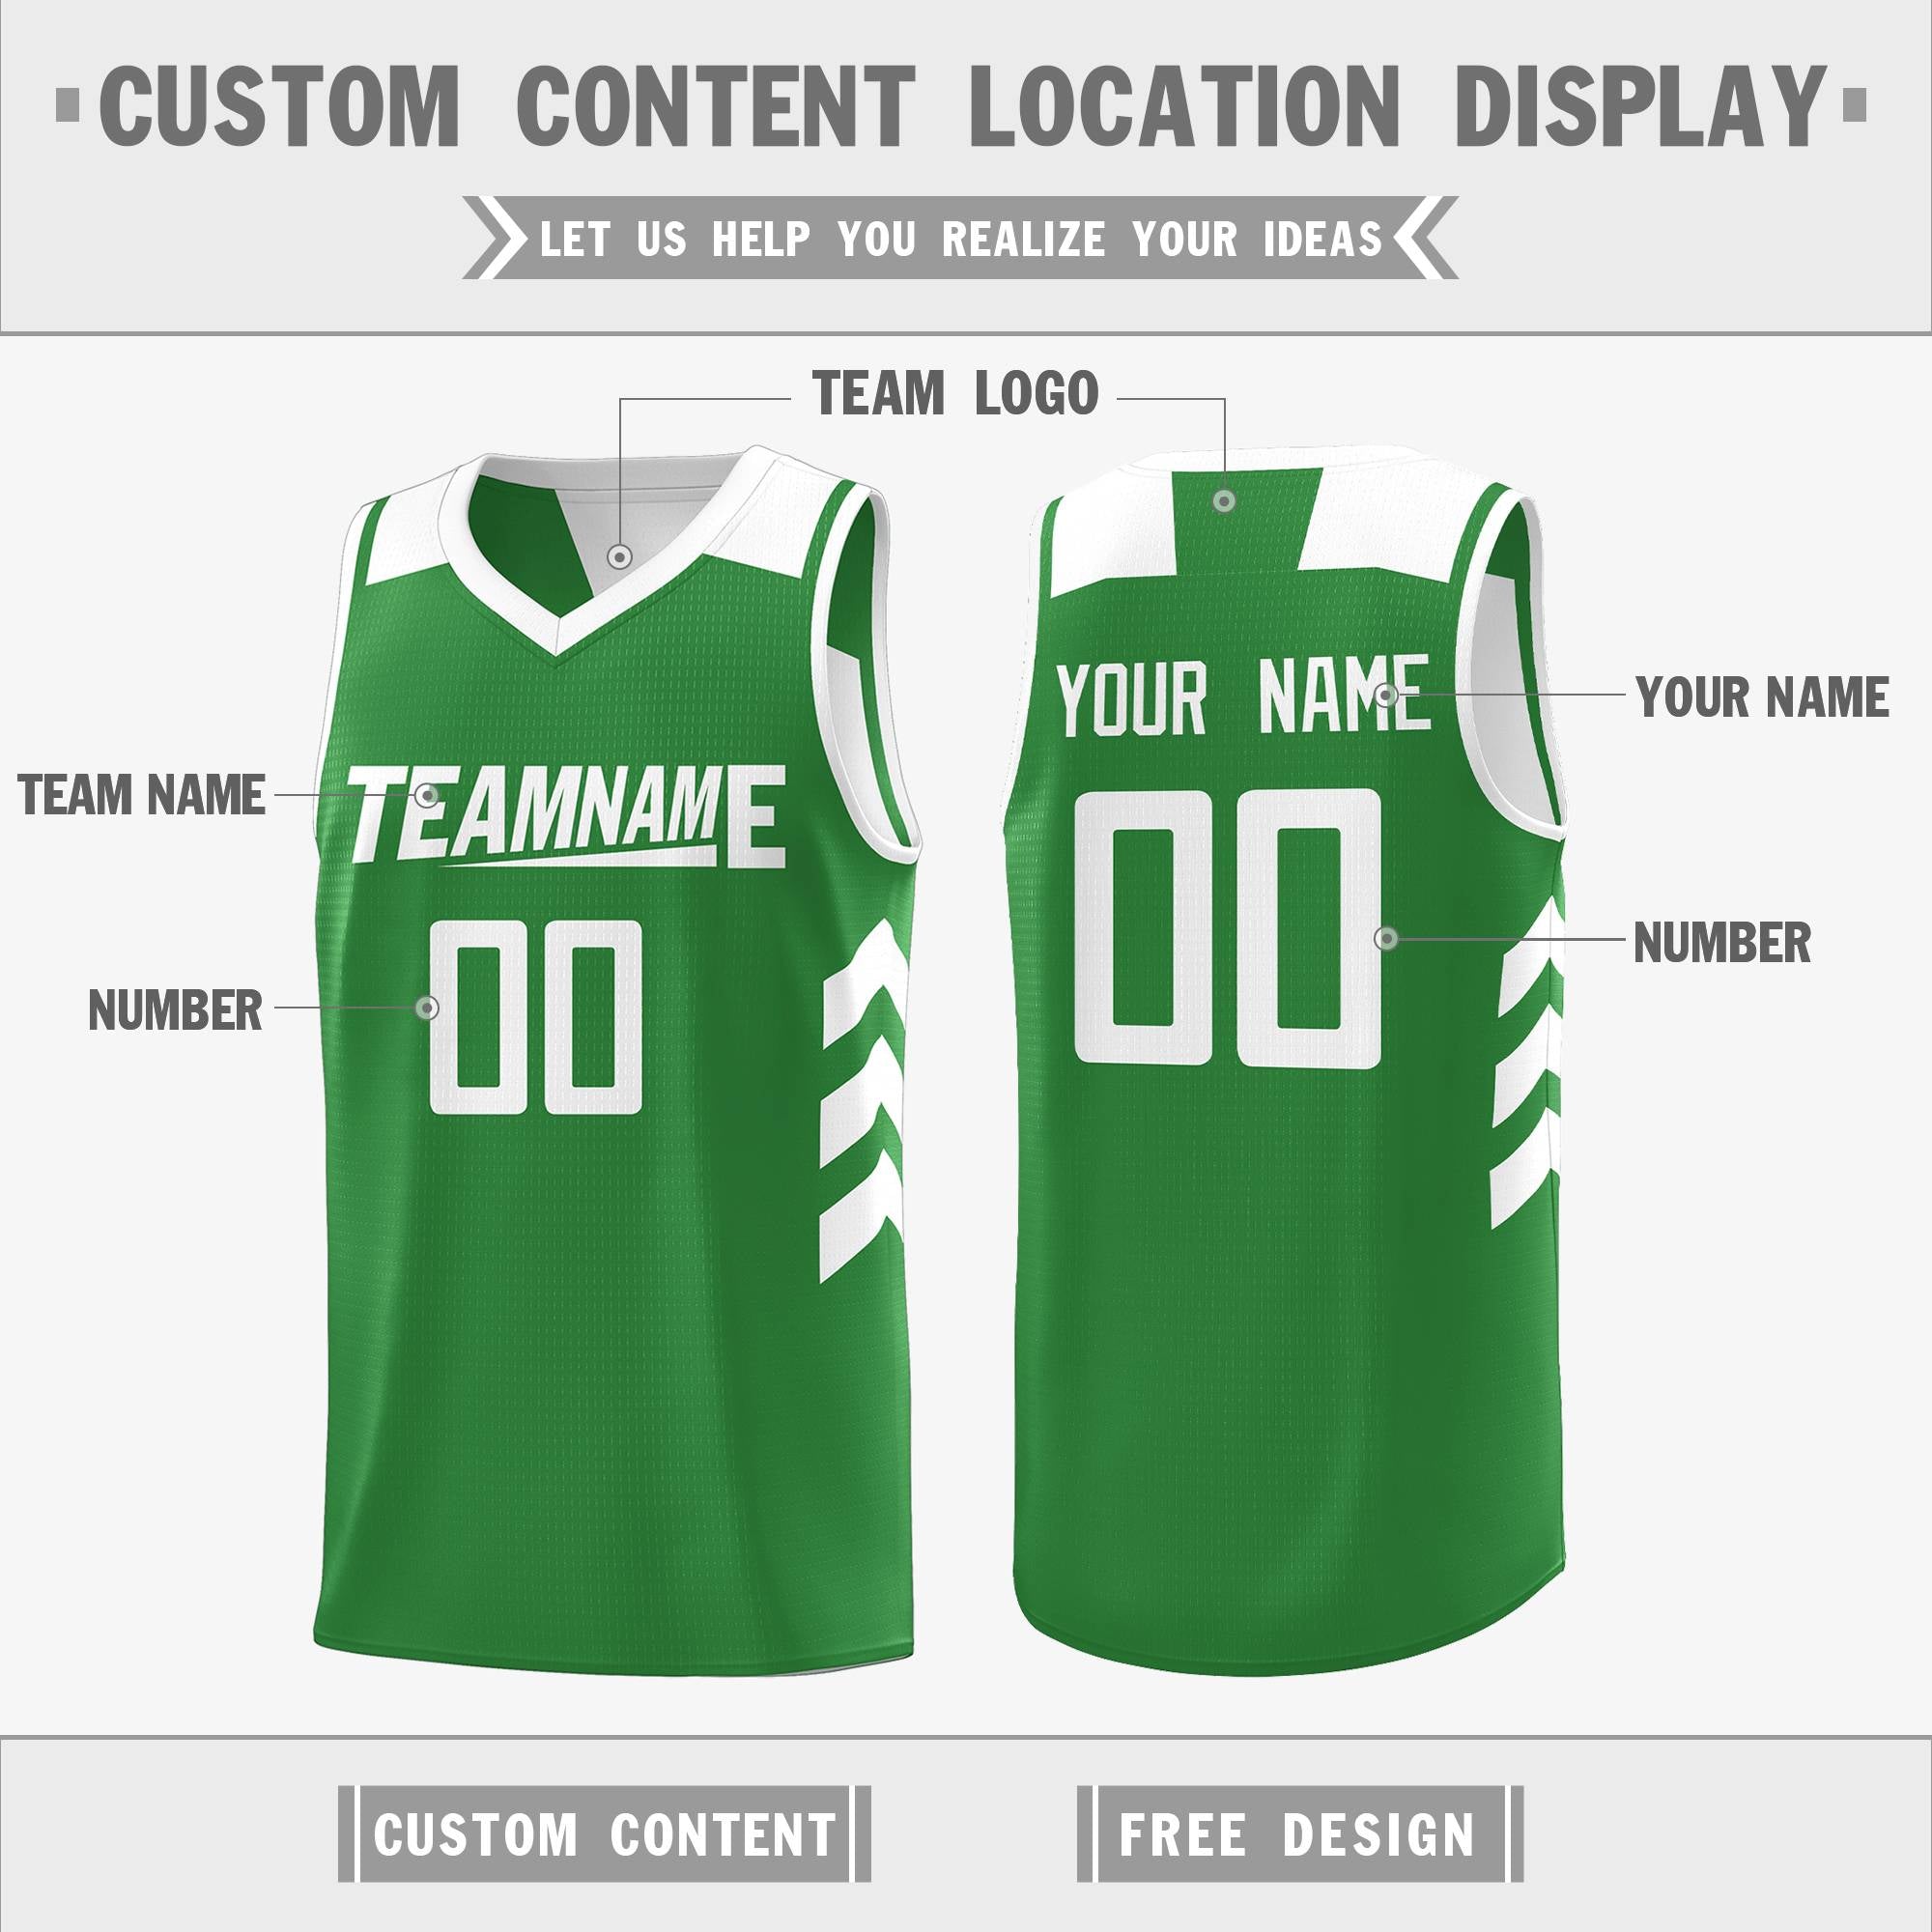 reversible basketball practice jerseys with numbers